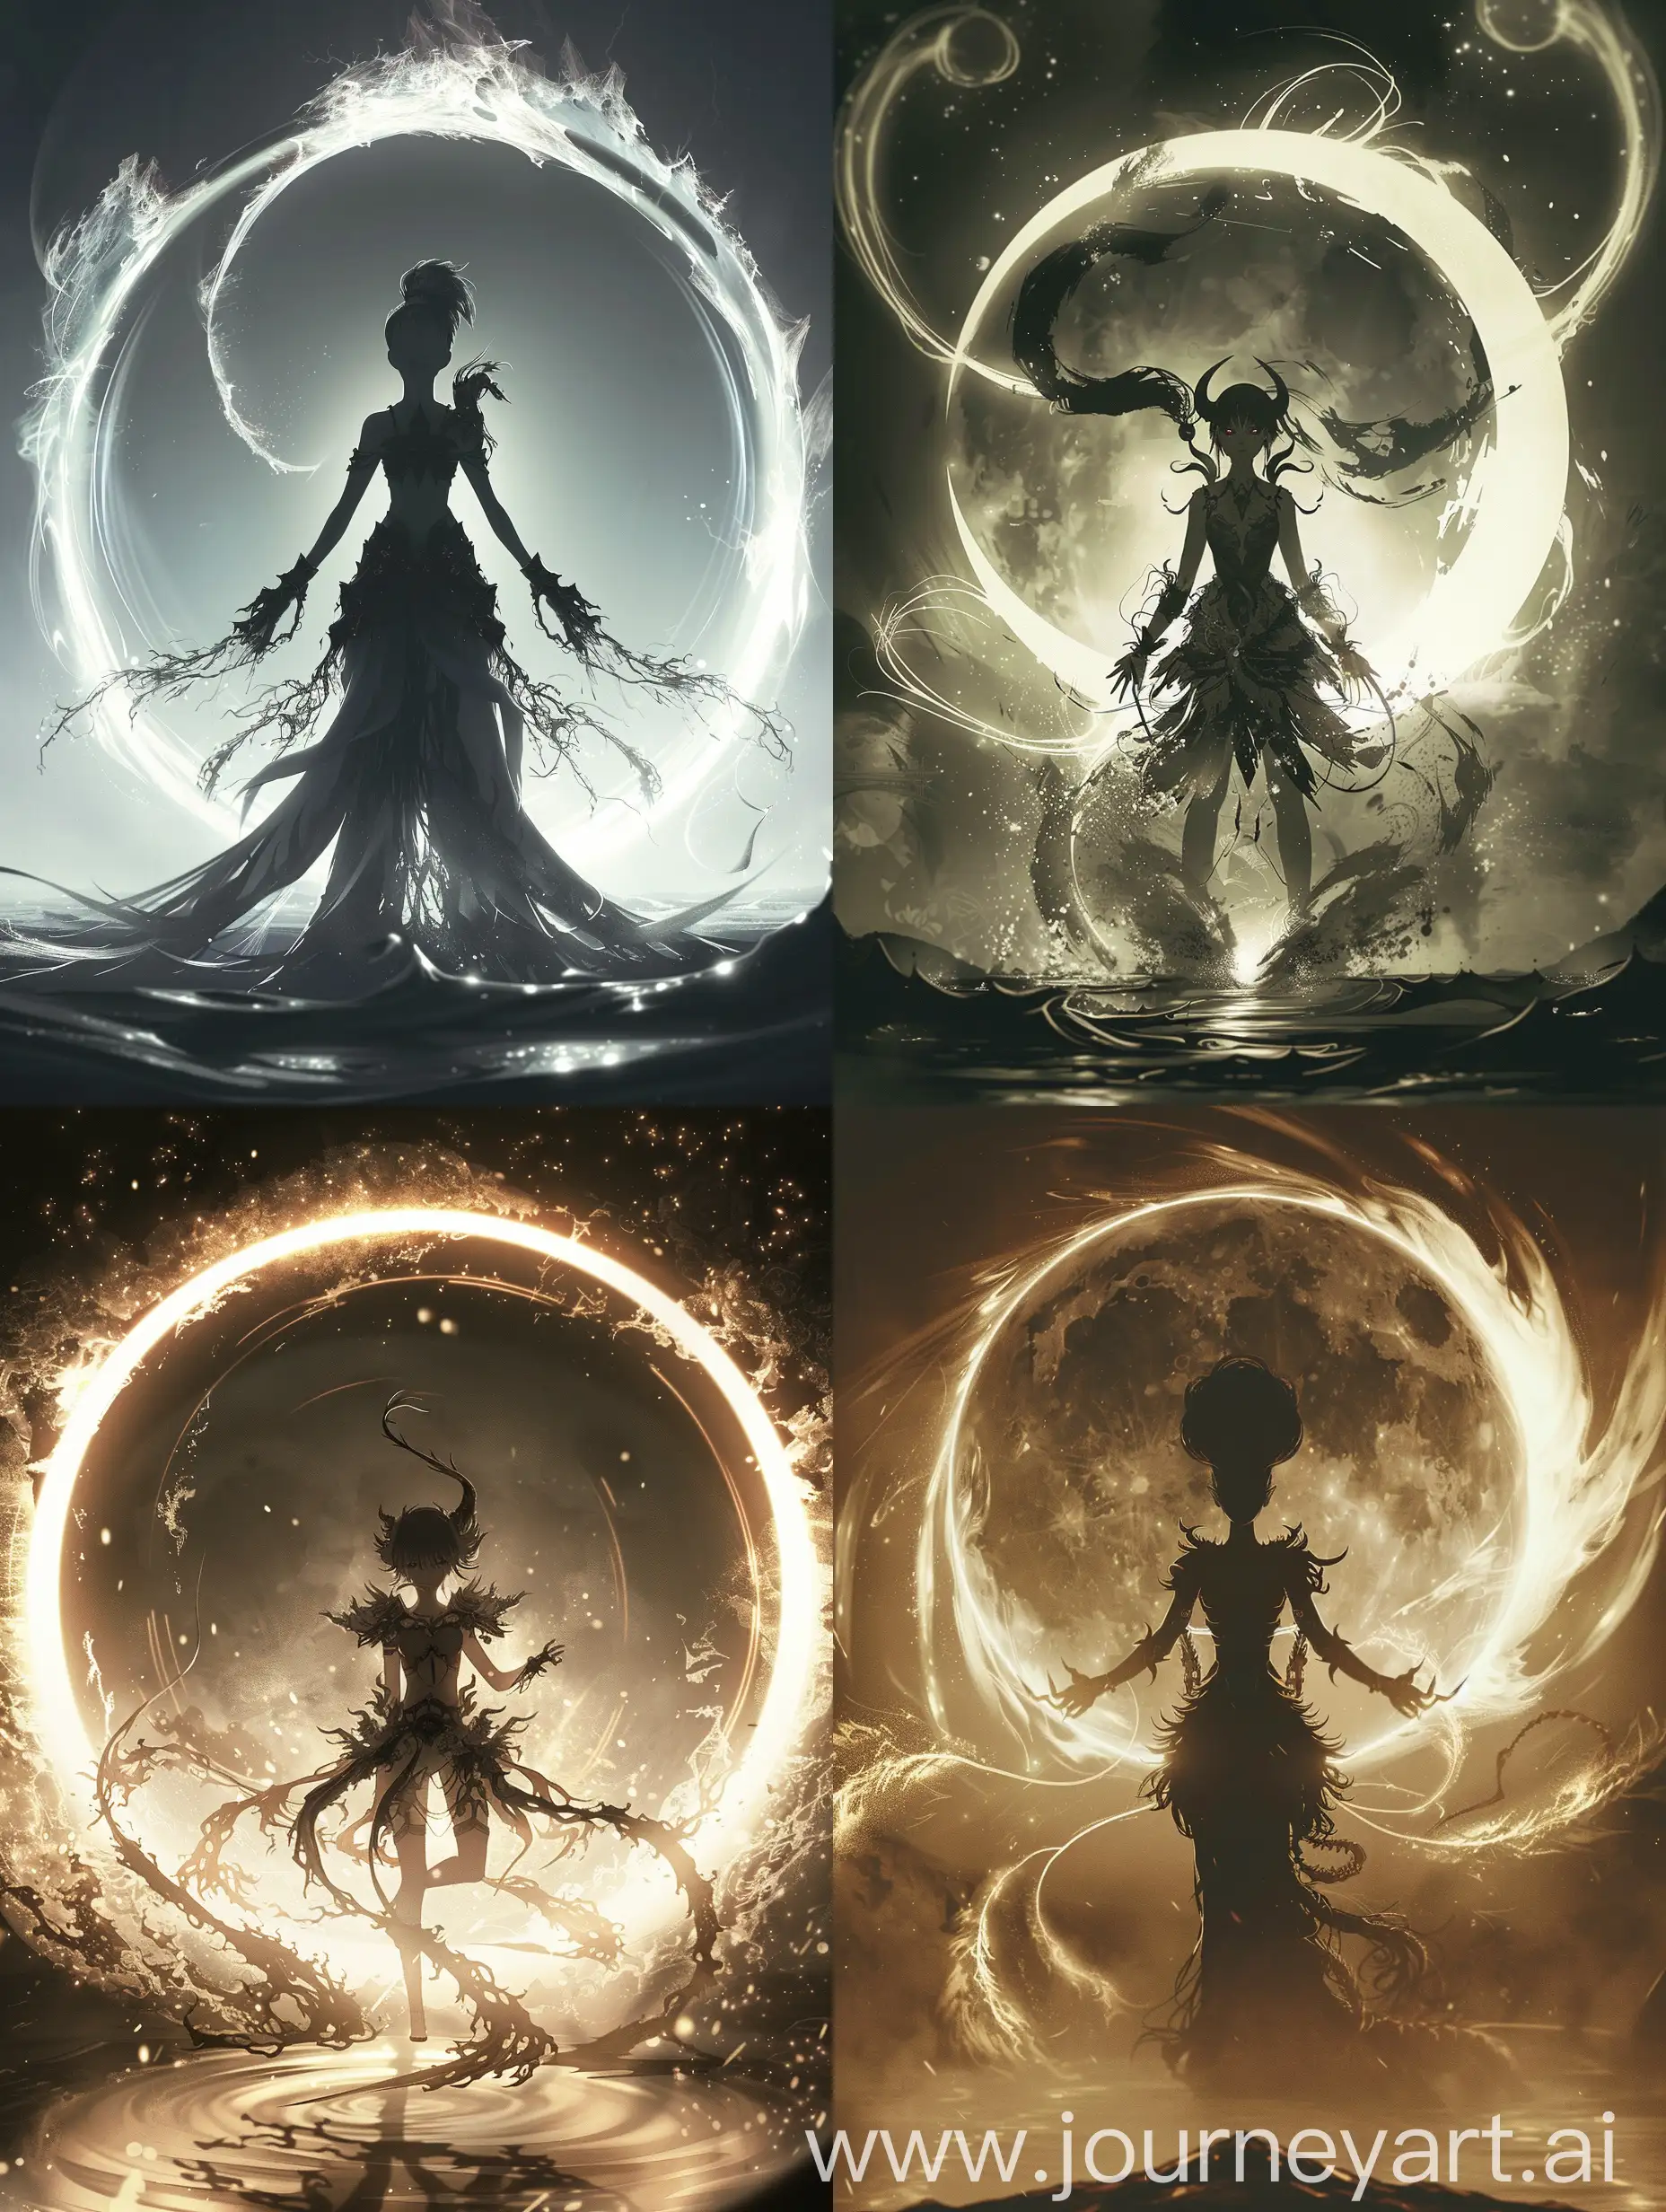 2D anime graphics
Envision a scene from a dark fantasy world, similar to Fate/Stay Night, where a female demon child god is clearly visible and preparing a powerful attack. She stands at the center, with intense focus and determination on her face. Behind her, a magnificent arc that closely resembles the moon illuminates her silhouette, enhancing the mystical and ominous ambiance of the scene. This moonlike arc is not just a backdrop; it's actively involved in the attack preparation, with magical energy flowing from it towards her hands, signifying the gathering of a potent force. The energy is visualized as a mixture of ethereal light and shadowy tendrils, swirling around her, ready to be unleashed. Her attire is elaborate, with demonic and godly motifs, symbolizing her unique heritage and power. The setting is tense, with the surrounding environment reflecting the gravity of her impending attack, bathed in the soft, yet foreboding light of the moon arc.